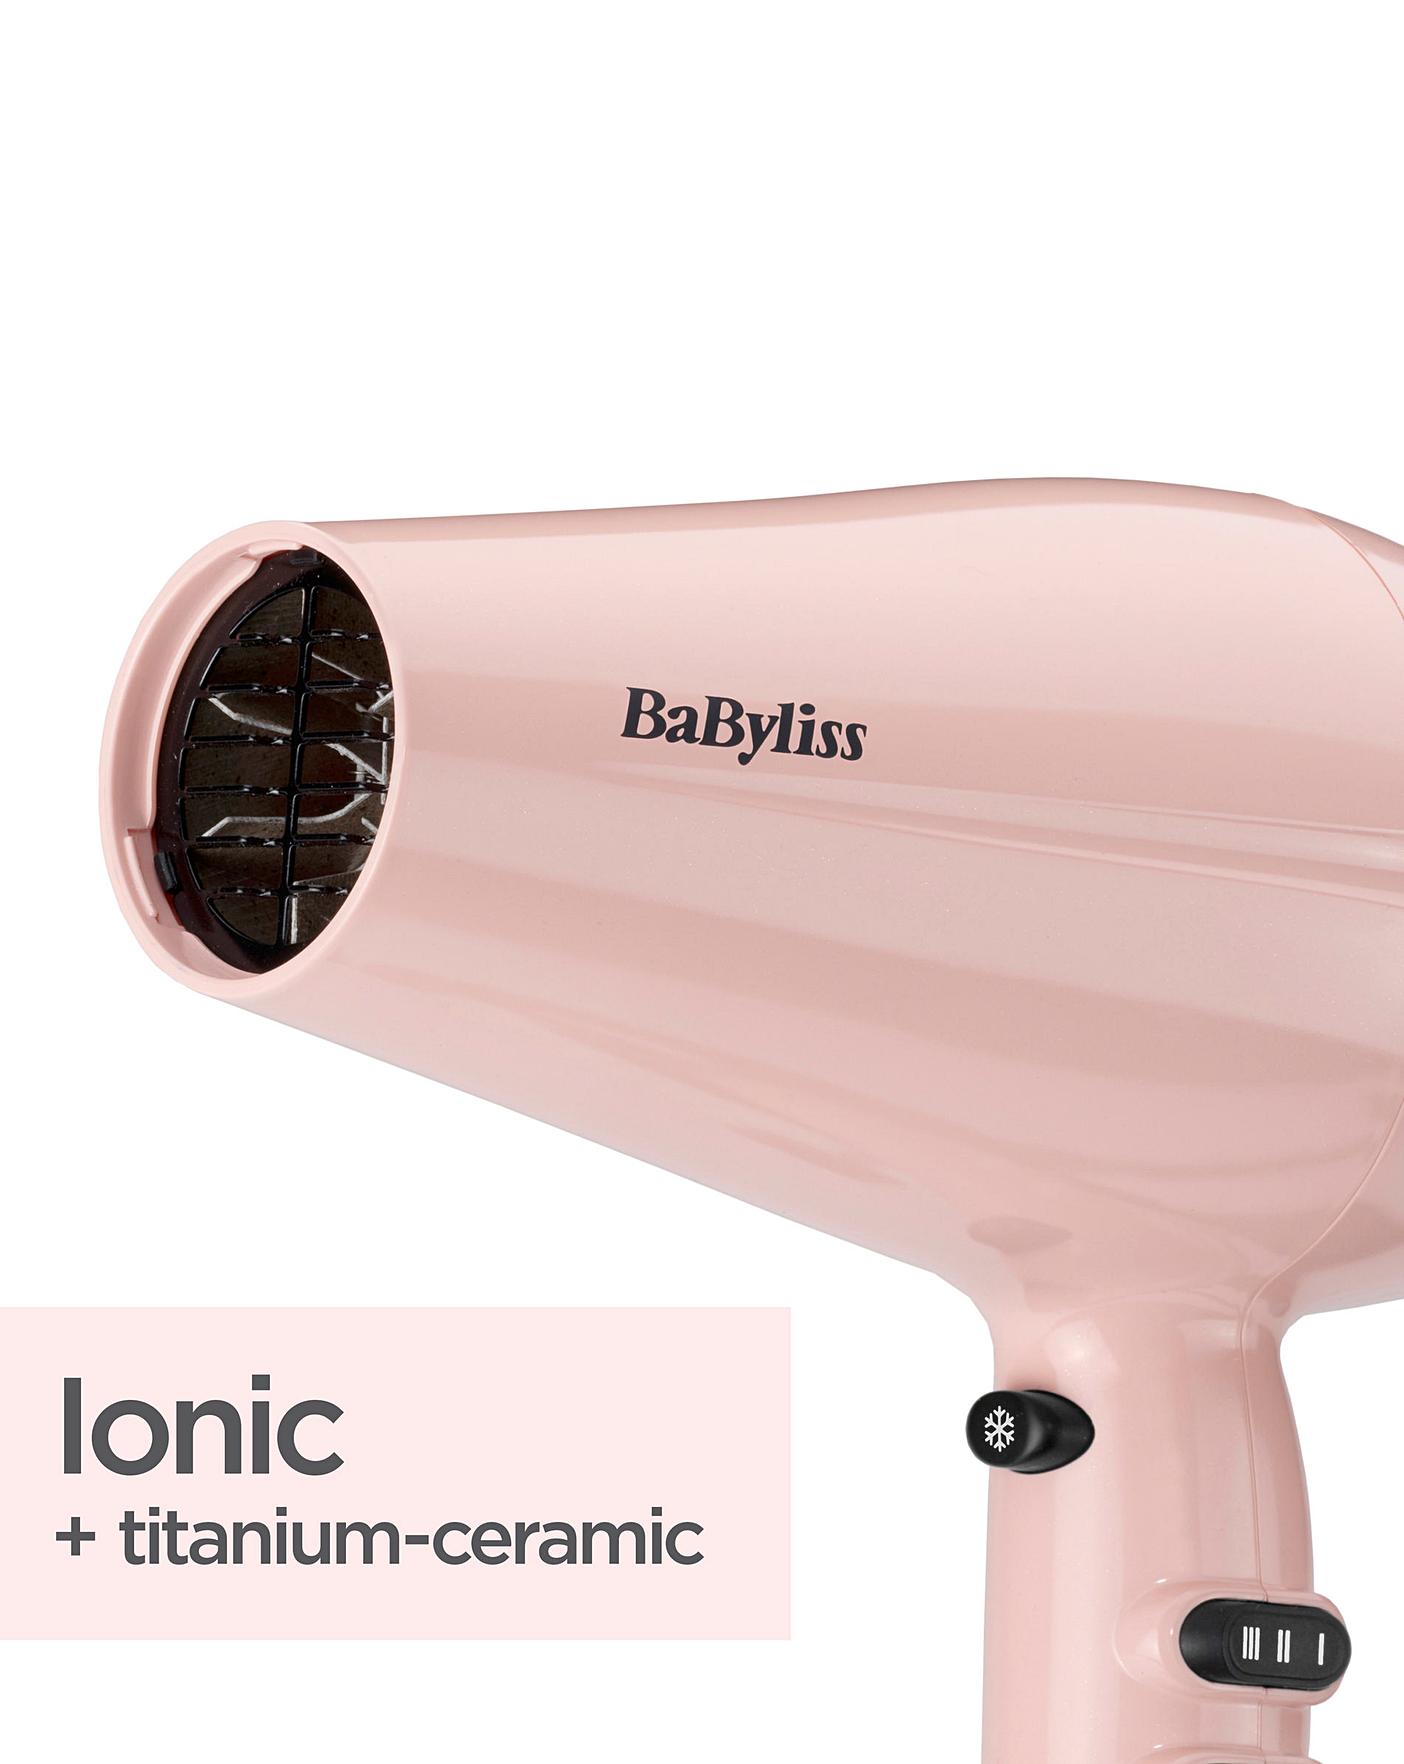 12 Best Travel Hair Dryers for 2023 - Small Blow Dryers for Traveling